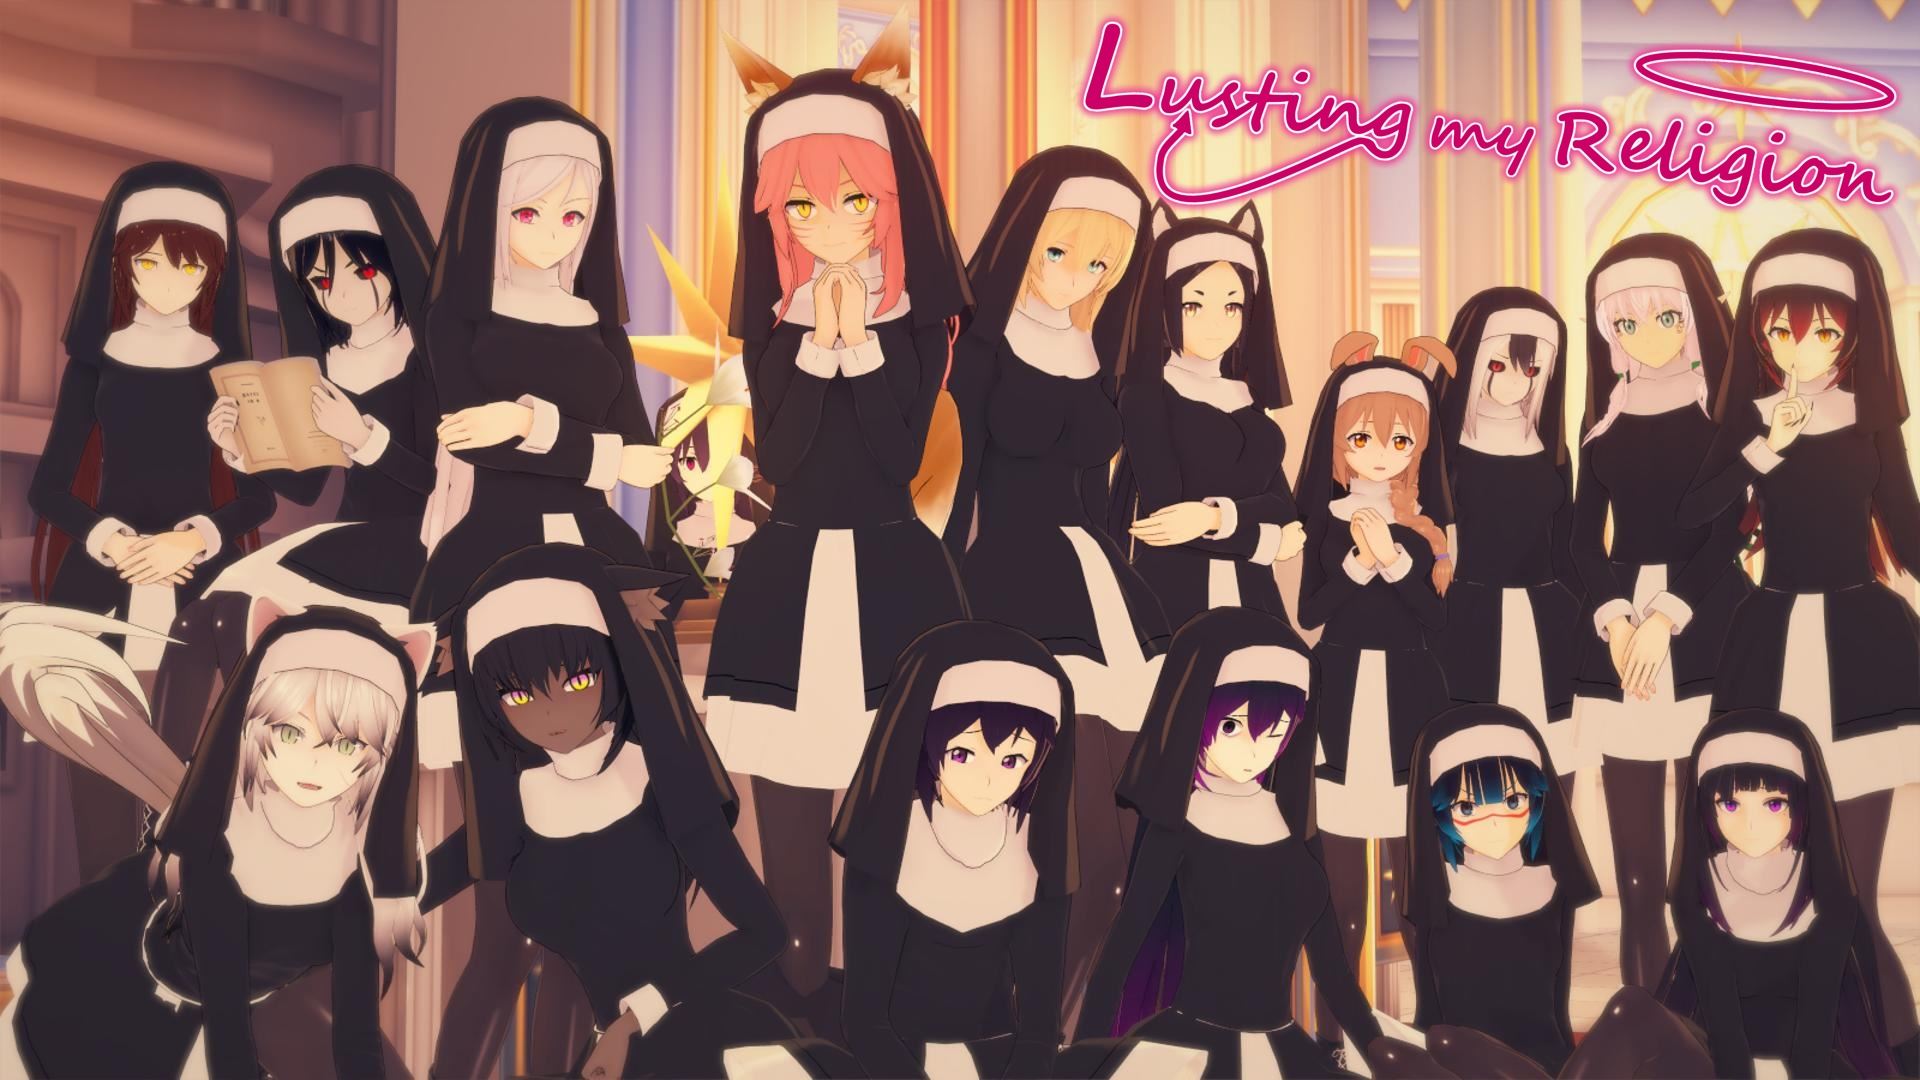 Lusting My Religion porn xxx game download cover